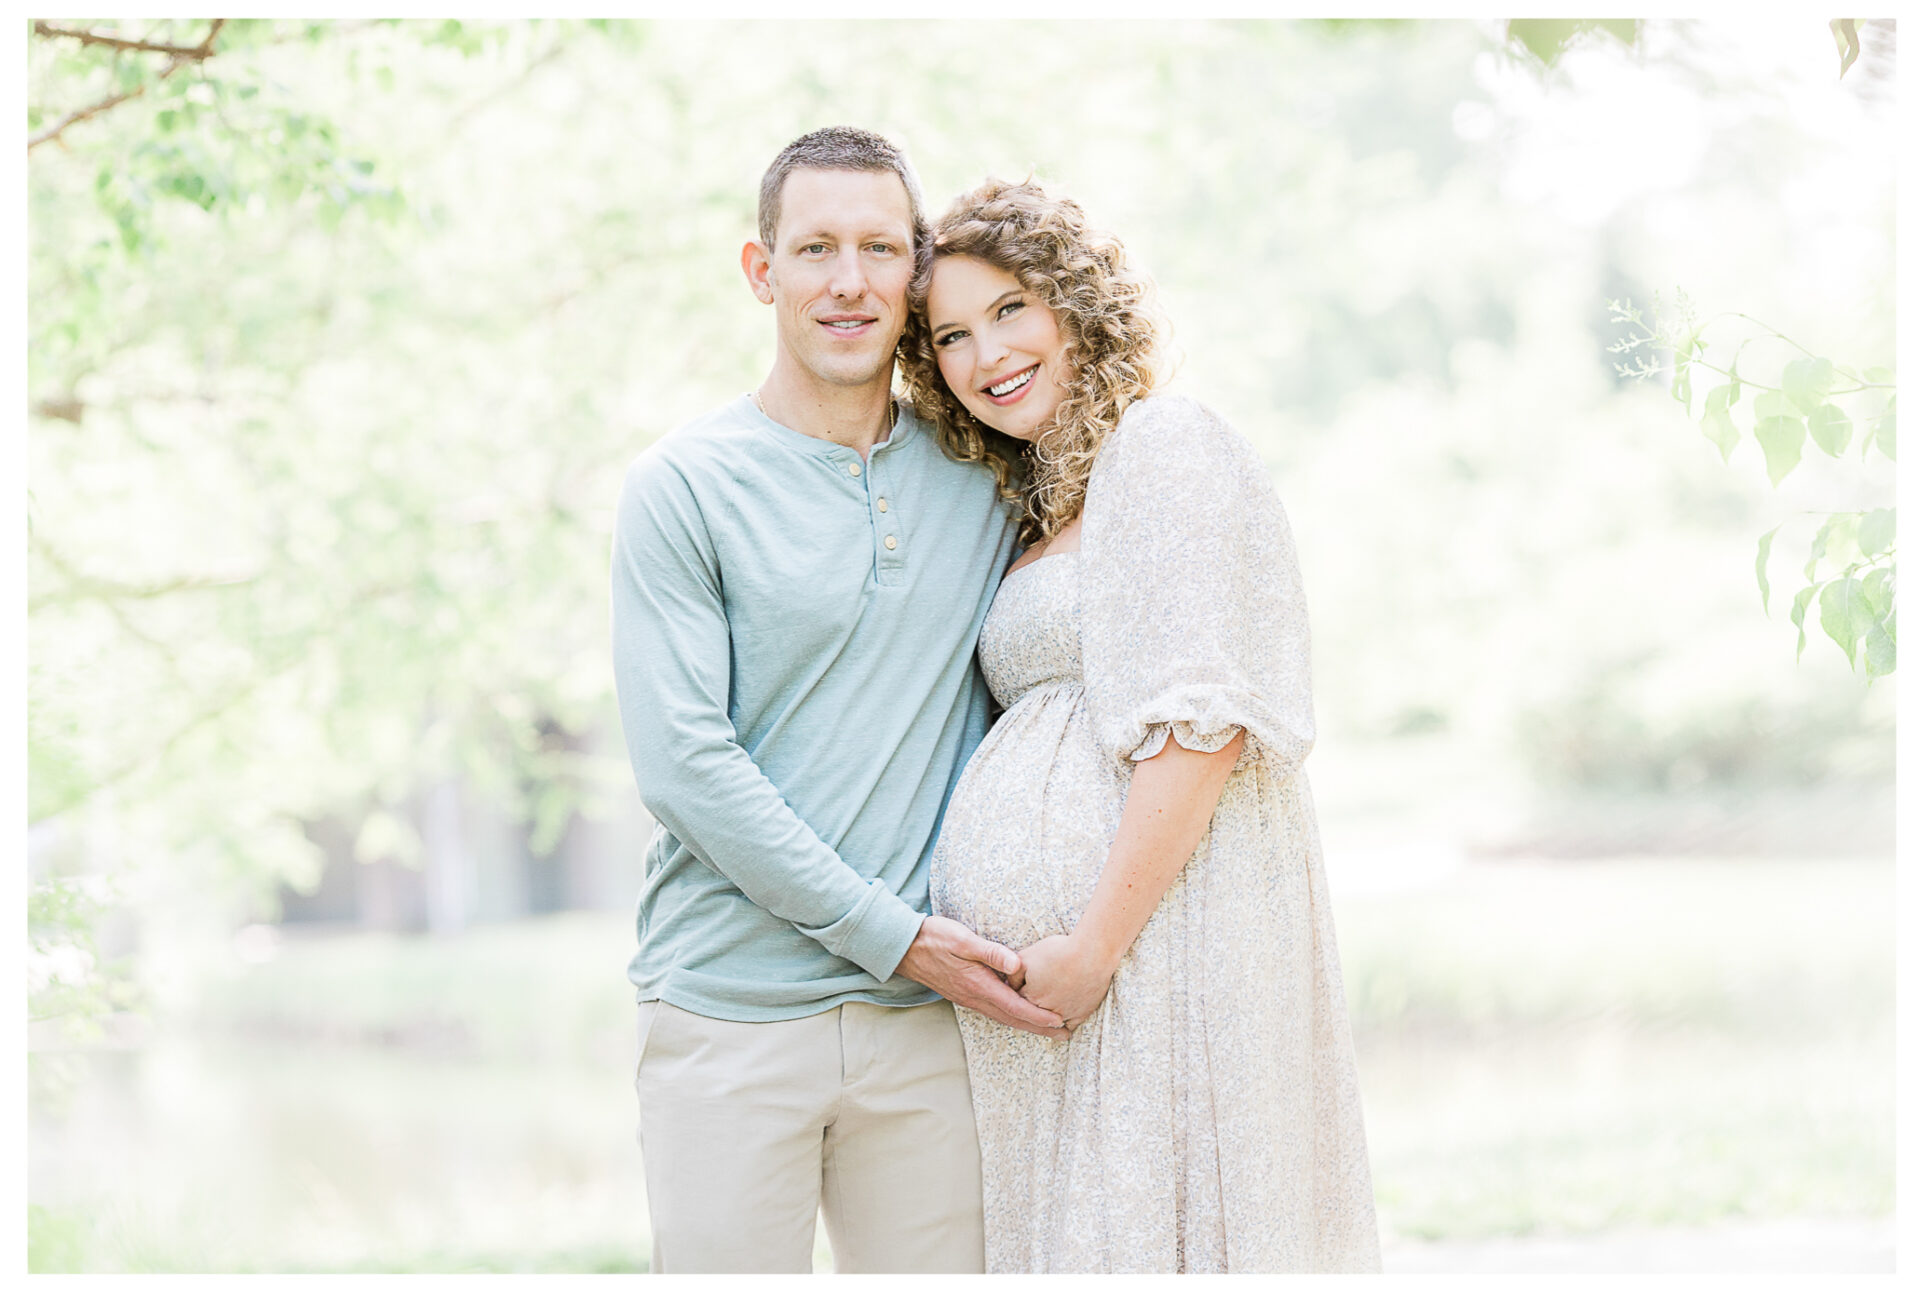 Winter Freire Photography | maternity session outdoors | husband and wife smiling together while placing their hands on the baby bump